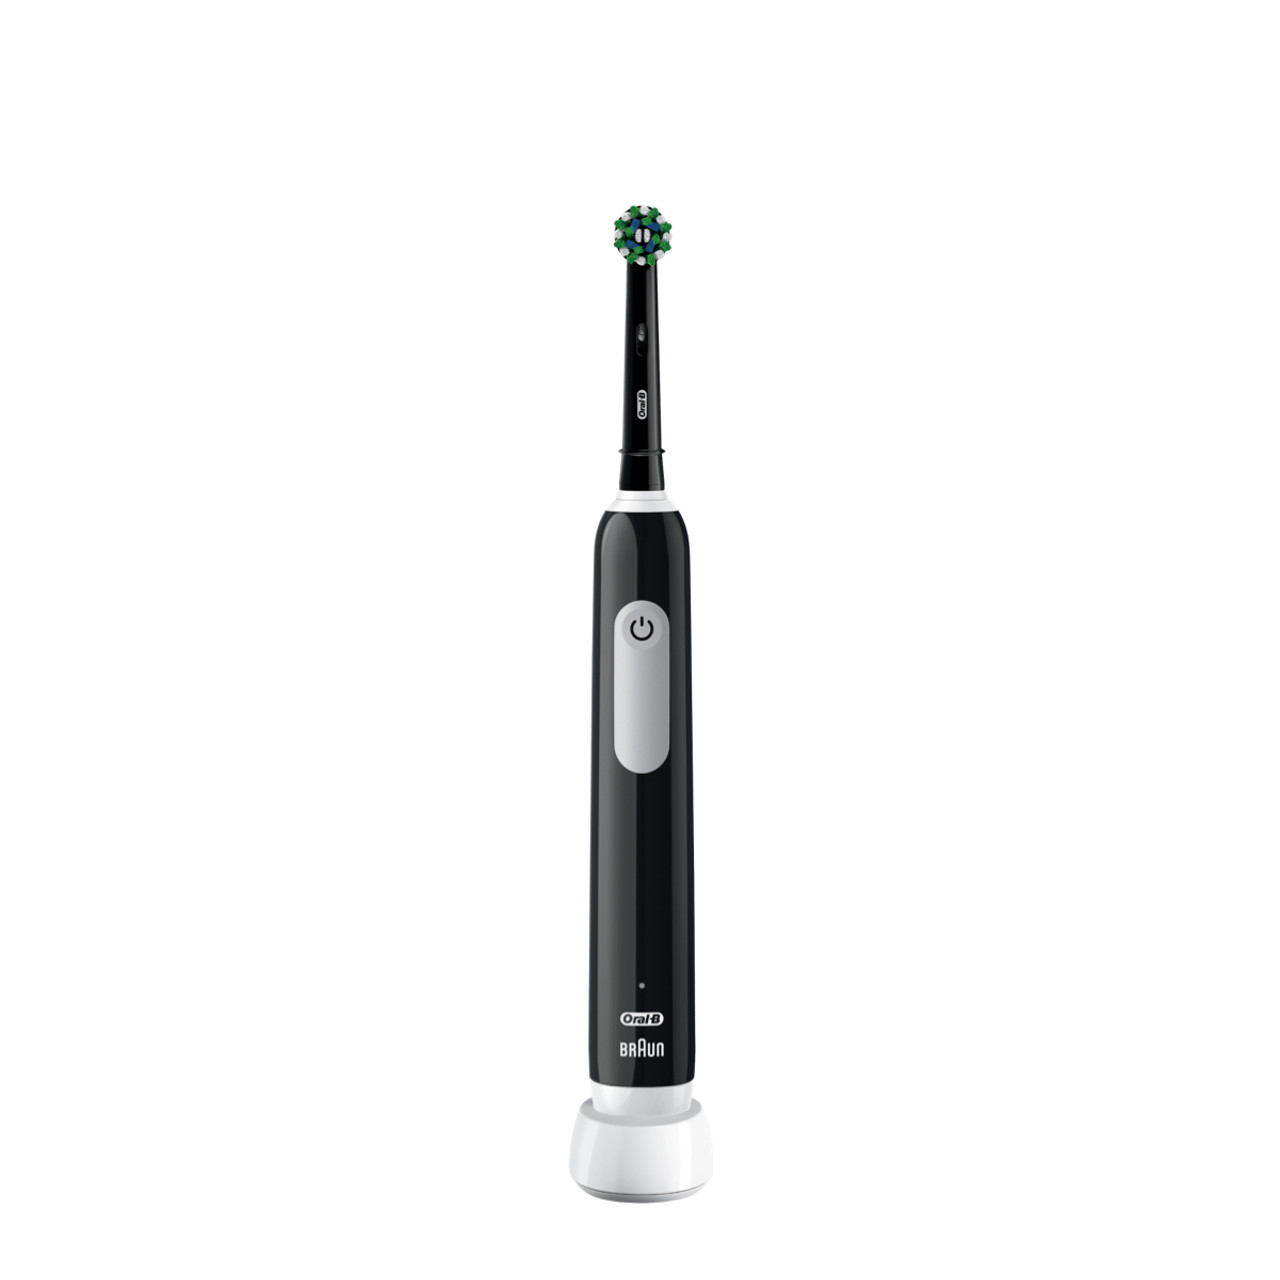  Oral-B Pro 1000 Rechargeable Electric Toothbrush, Black :  Health & Household